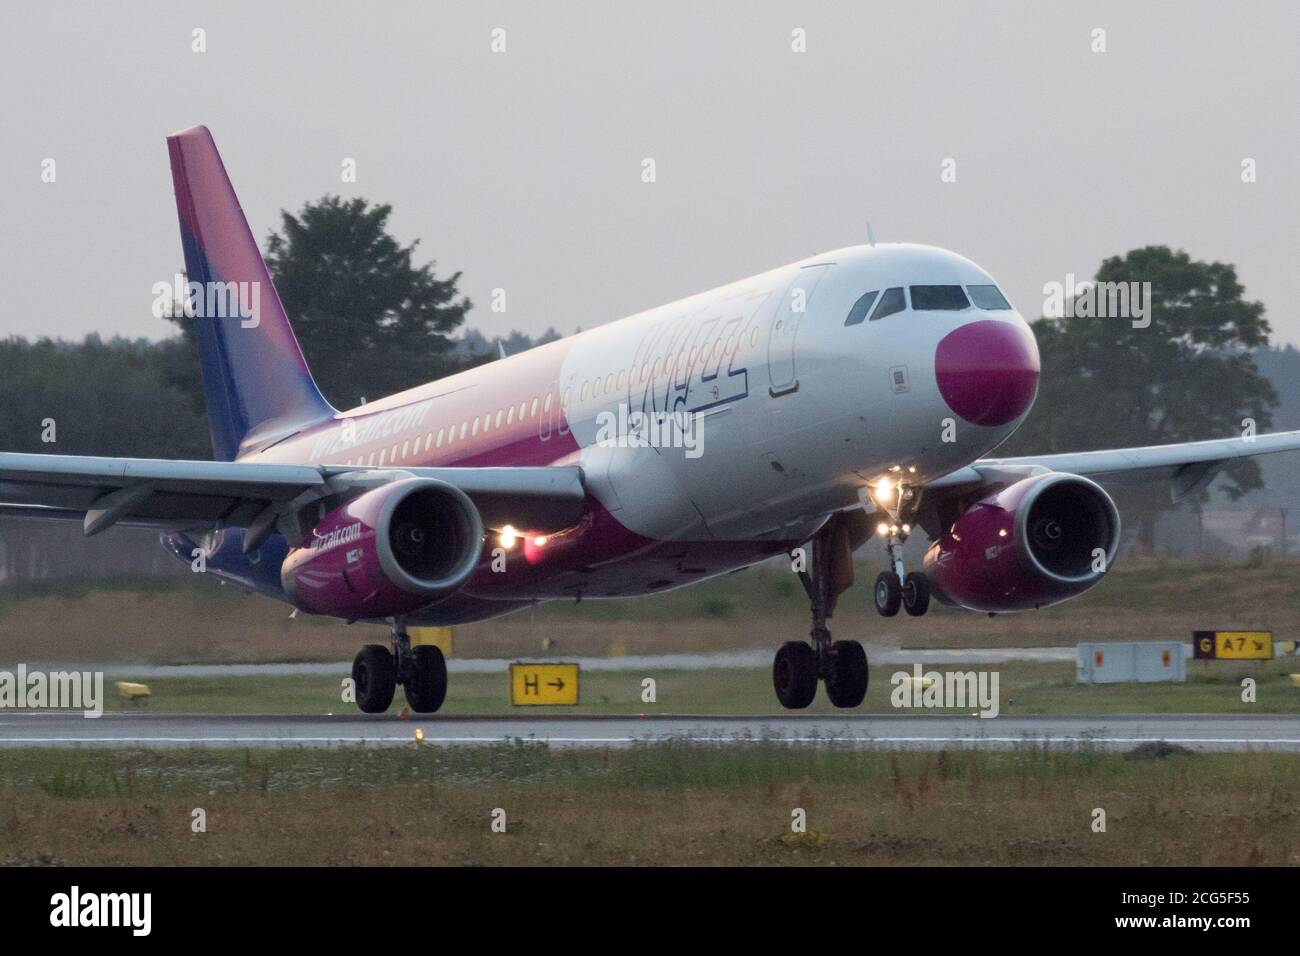 Low cost airline Wizz Air aircraft Airbus A320-232 in Gdansk, Poland. August 7th 2020 © Wojciech Strozyk / Alamy Stock Photo *** Local Caption *** Stock Photo